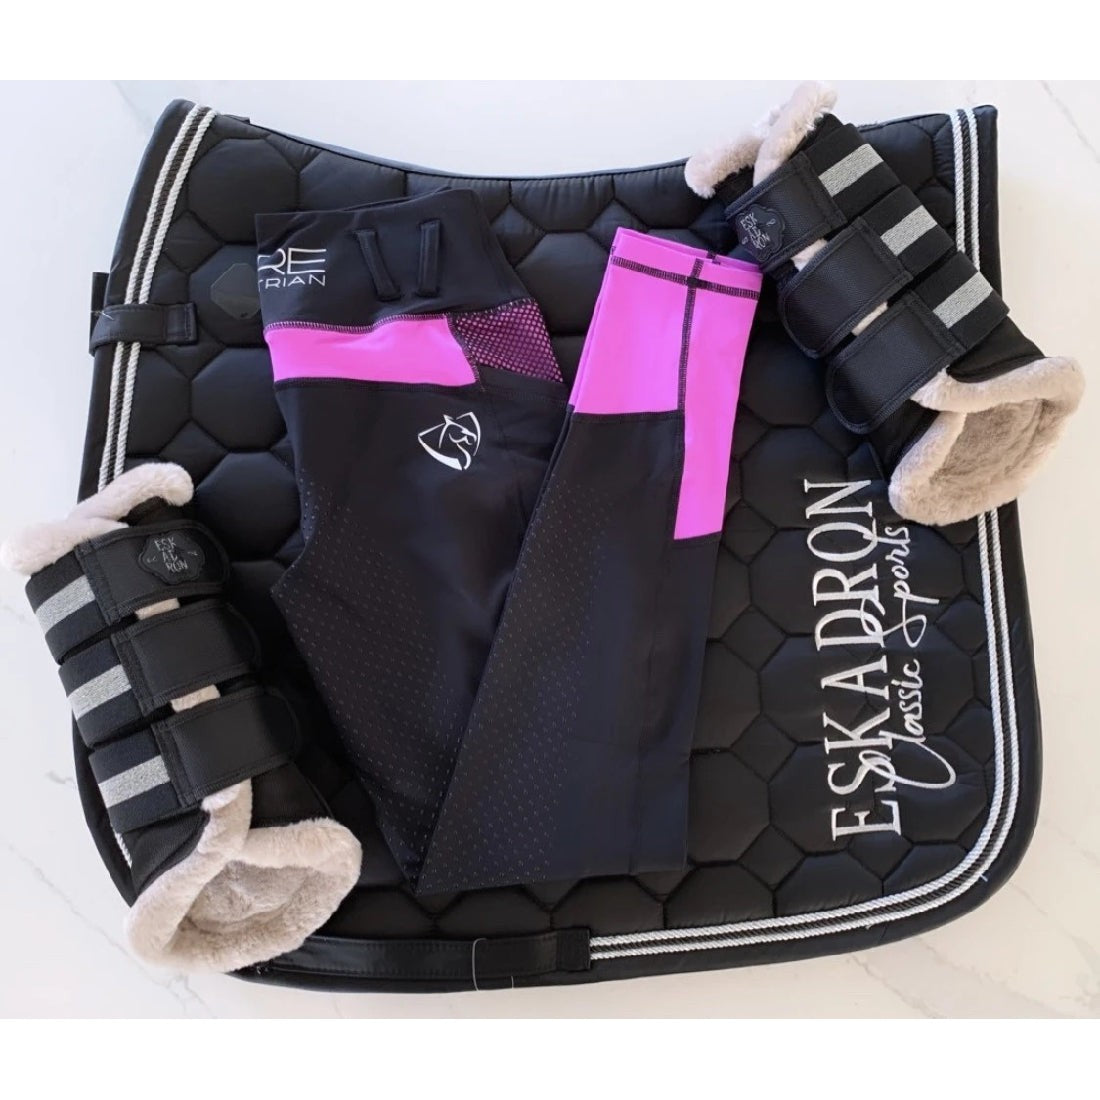 Black horse riding tights on saddle pad with protective leg boots.